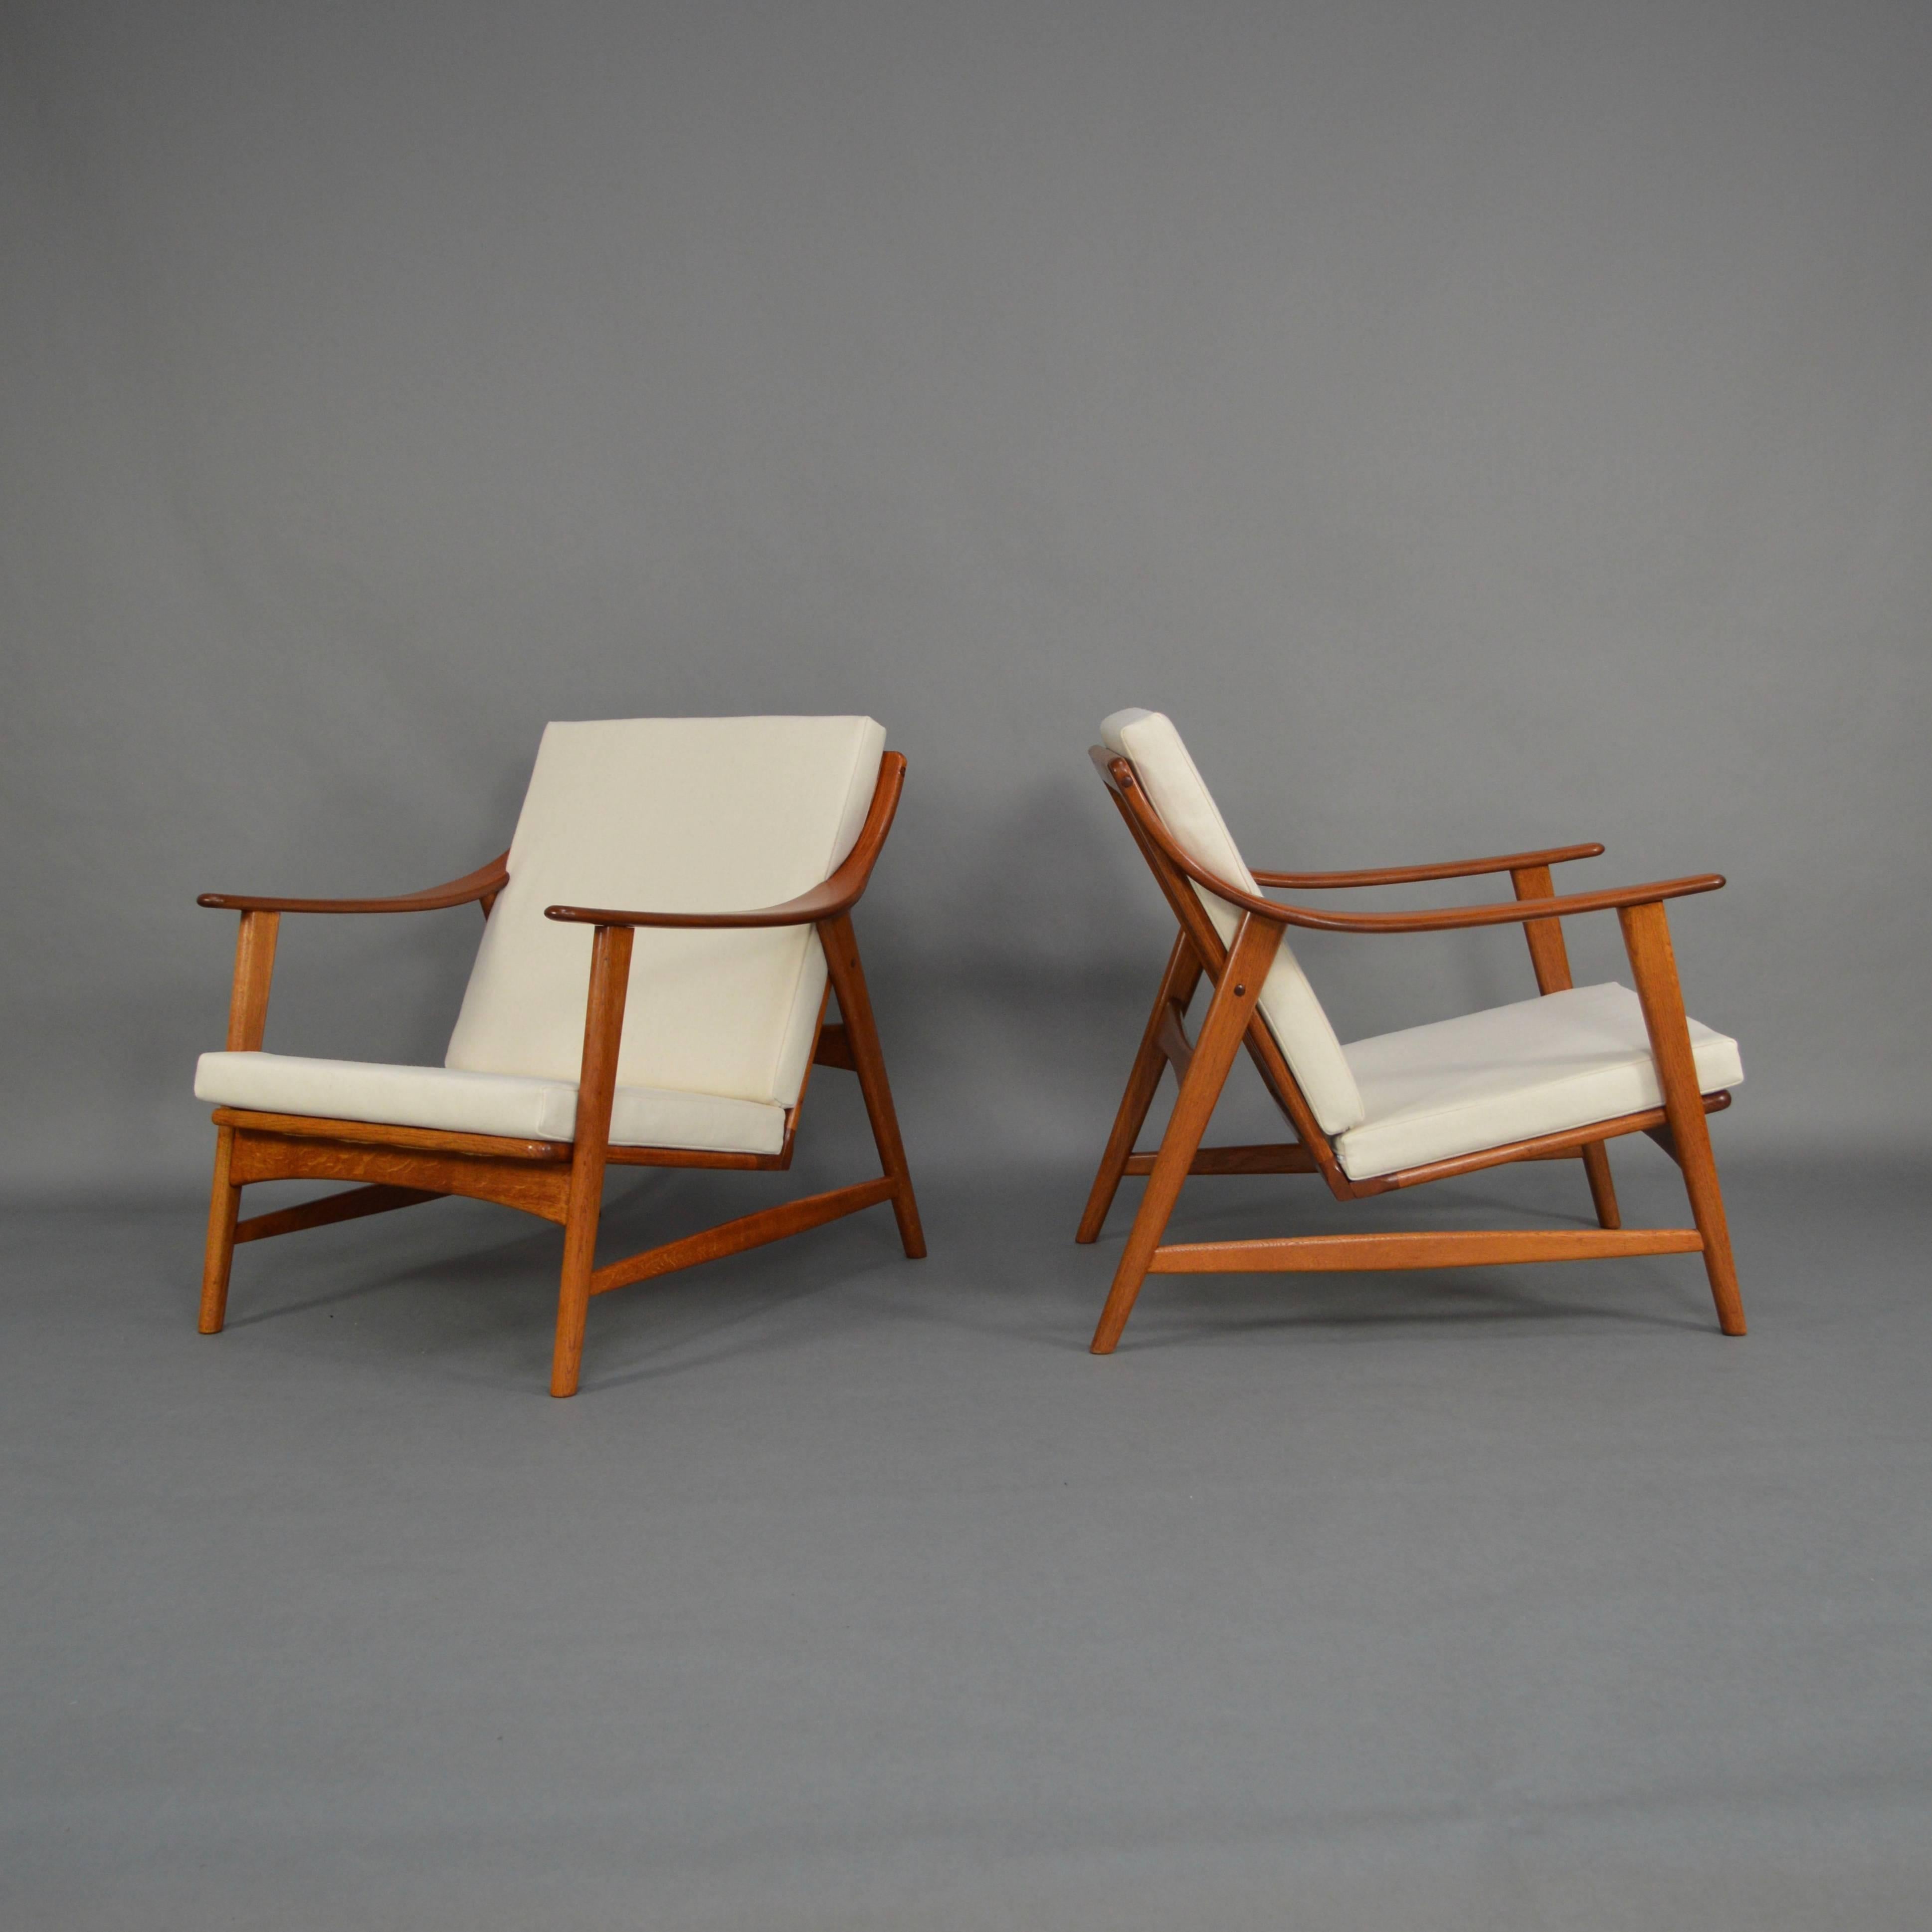 Very early and absolutely rare pair of MOGENS KOLD Arne Hovmand-Olsen lounge chairs.
The chairs are made of a combination of solid teak and oak wood. The wood has been stripped and refinished with a beautiful original furniture hardwax in multiple